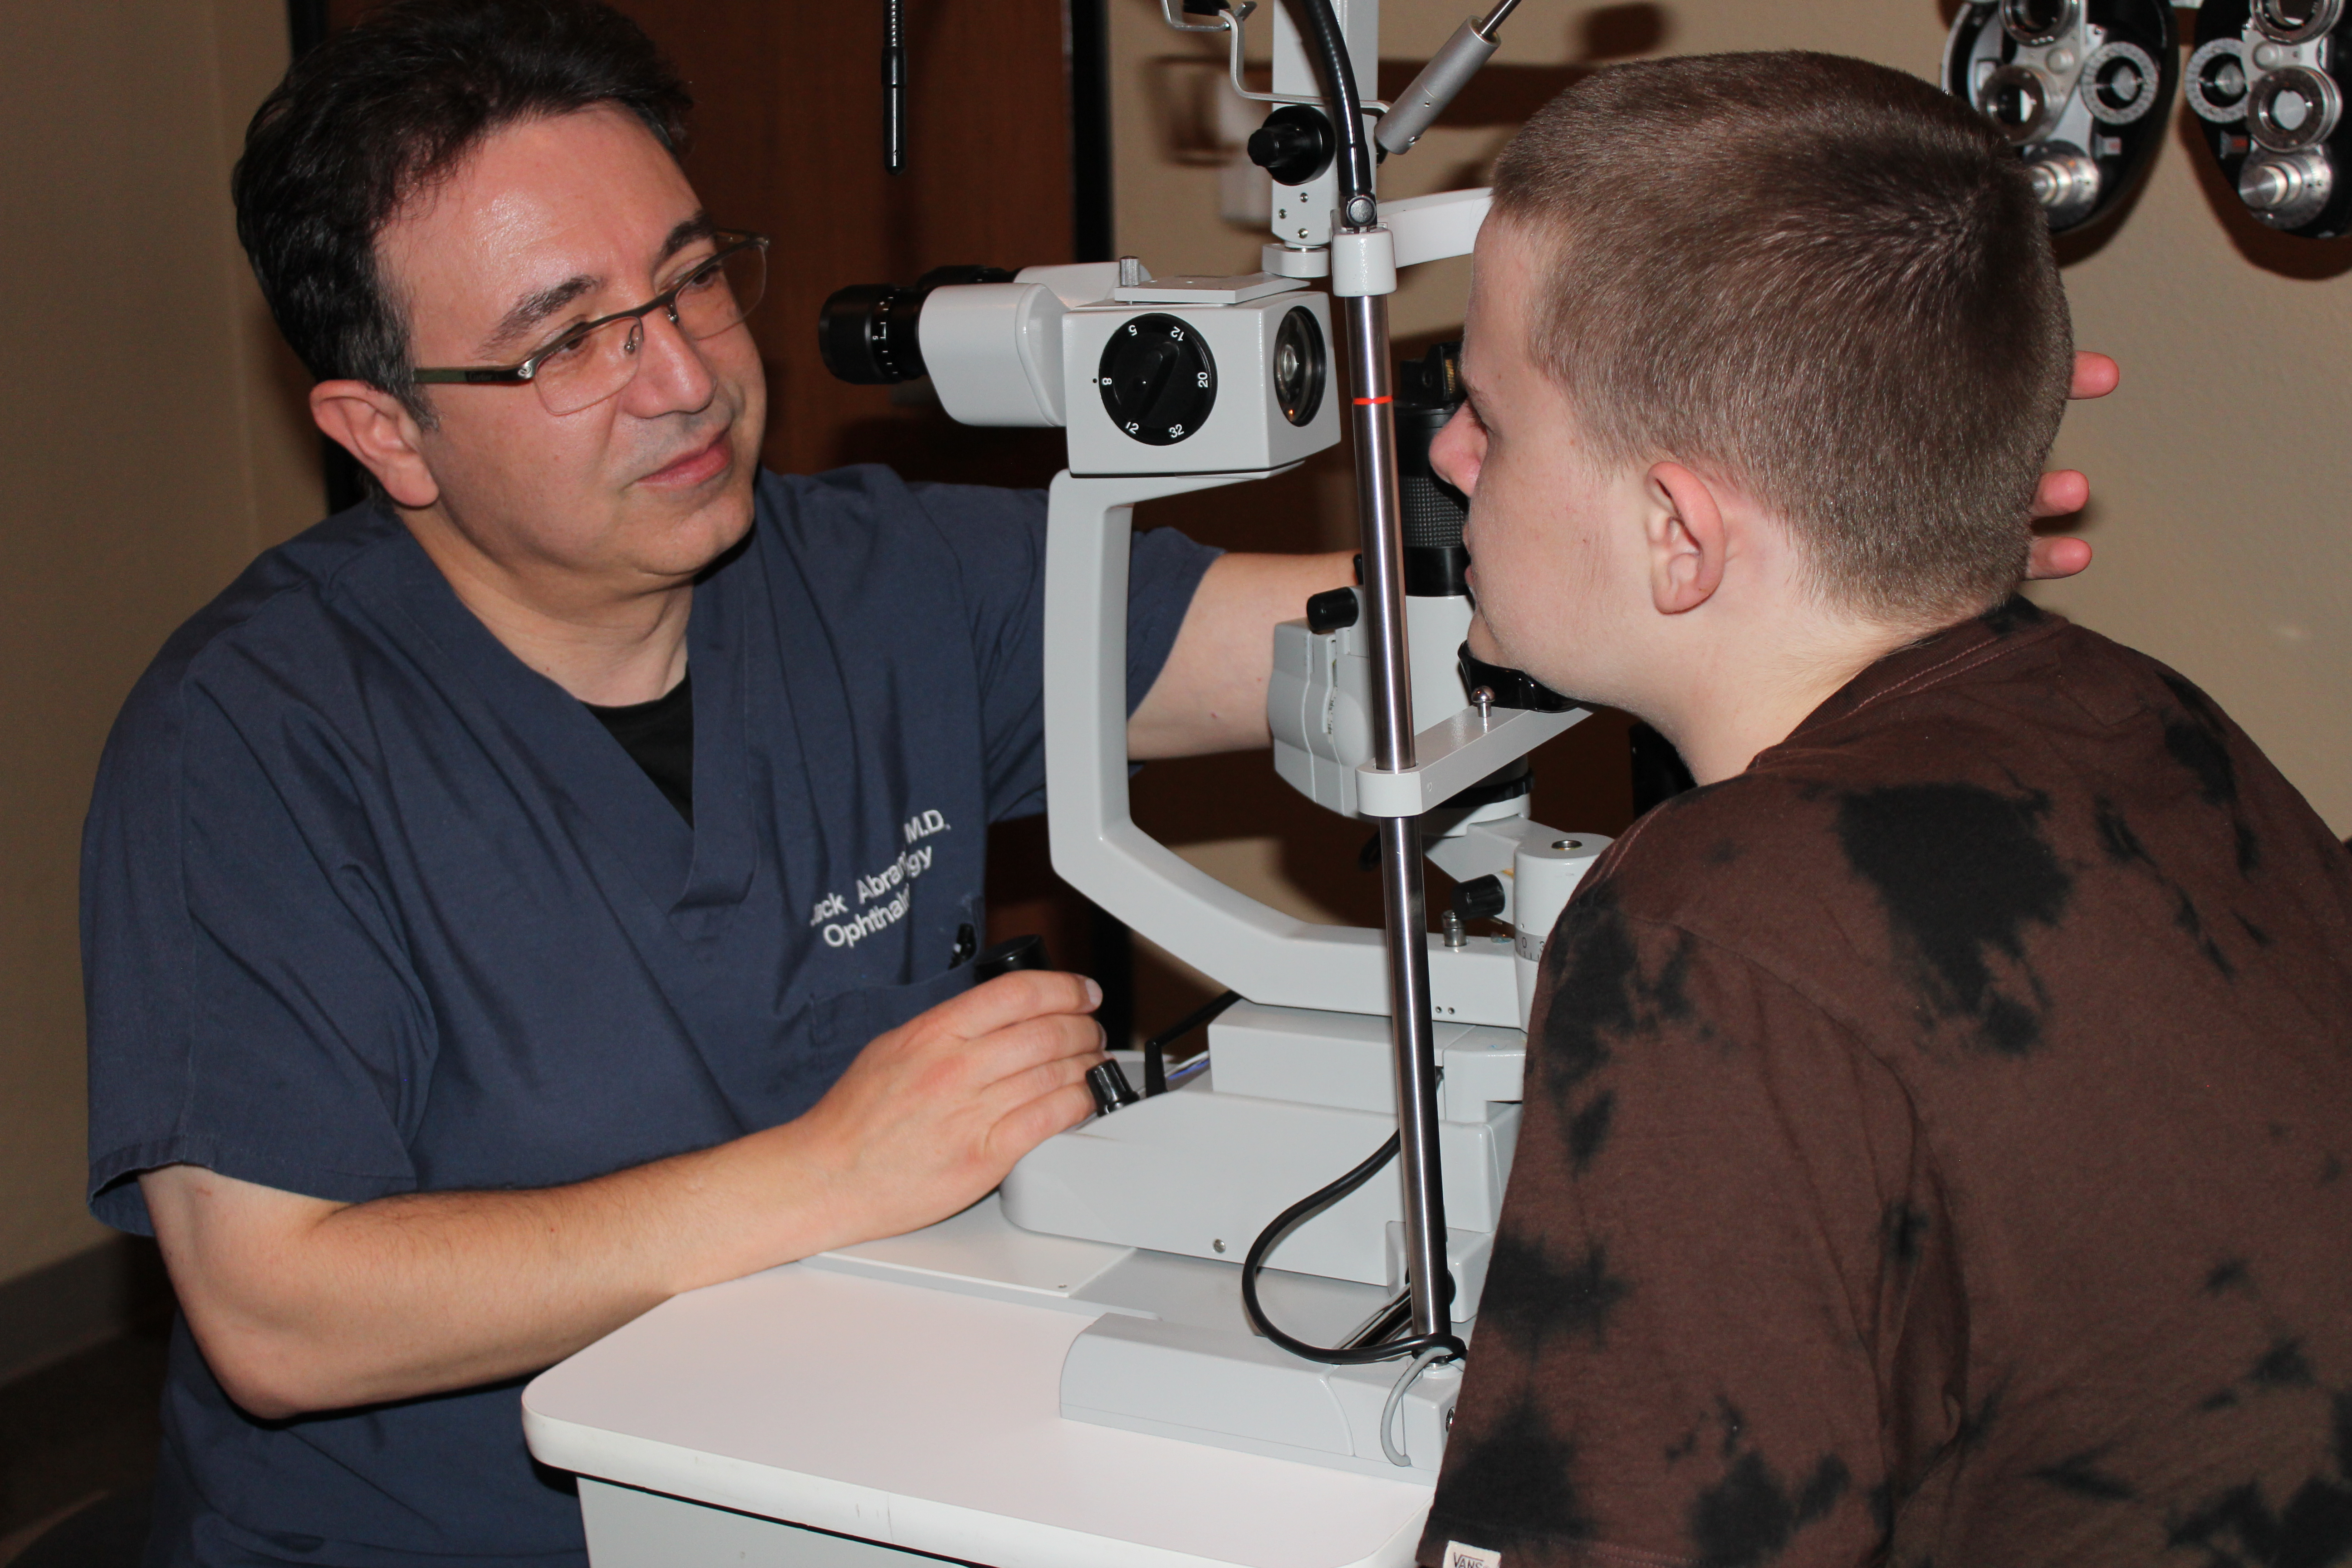 Dr. jack Abrams held a free eye clinic for kids in time for back to school.